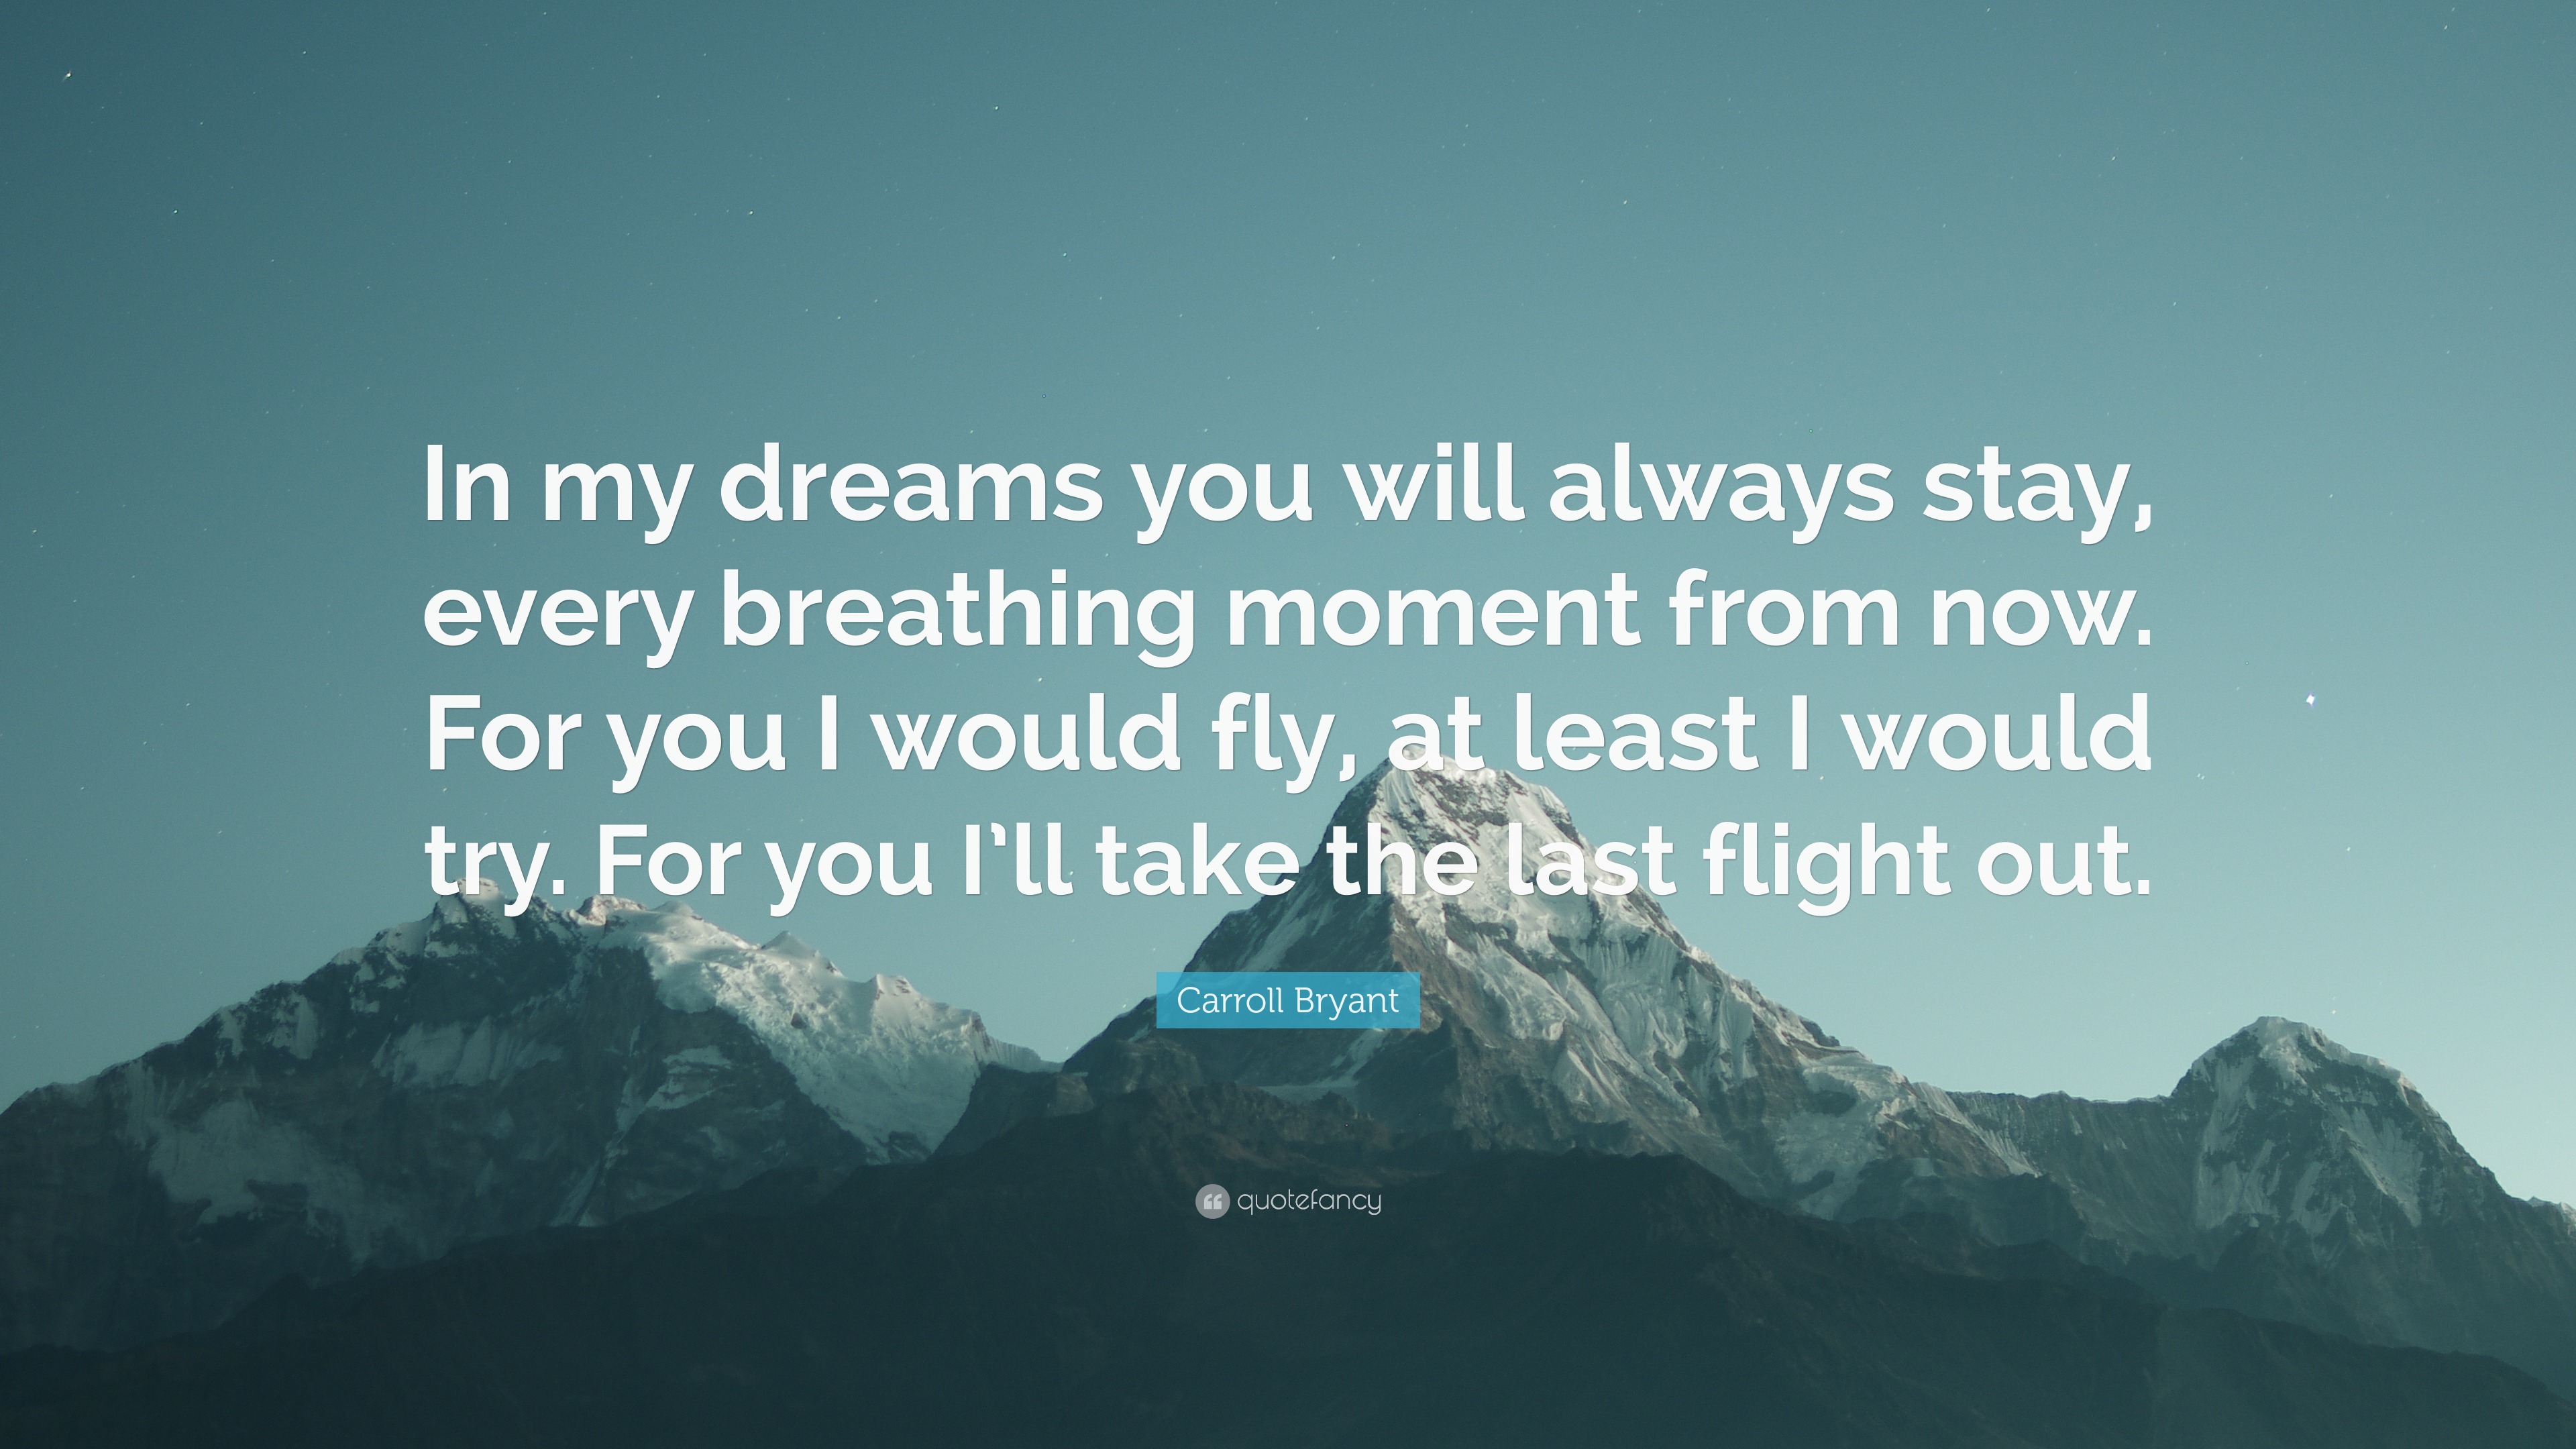 Carroll Bryant Quote In My Dreams You Will Always Stay Every Breathing Moment From Now For You I Would Fly At Least I Would Try For You I